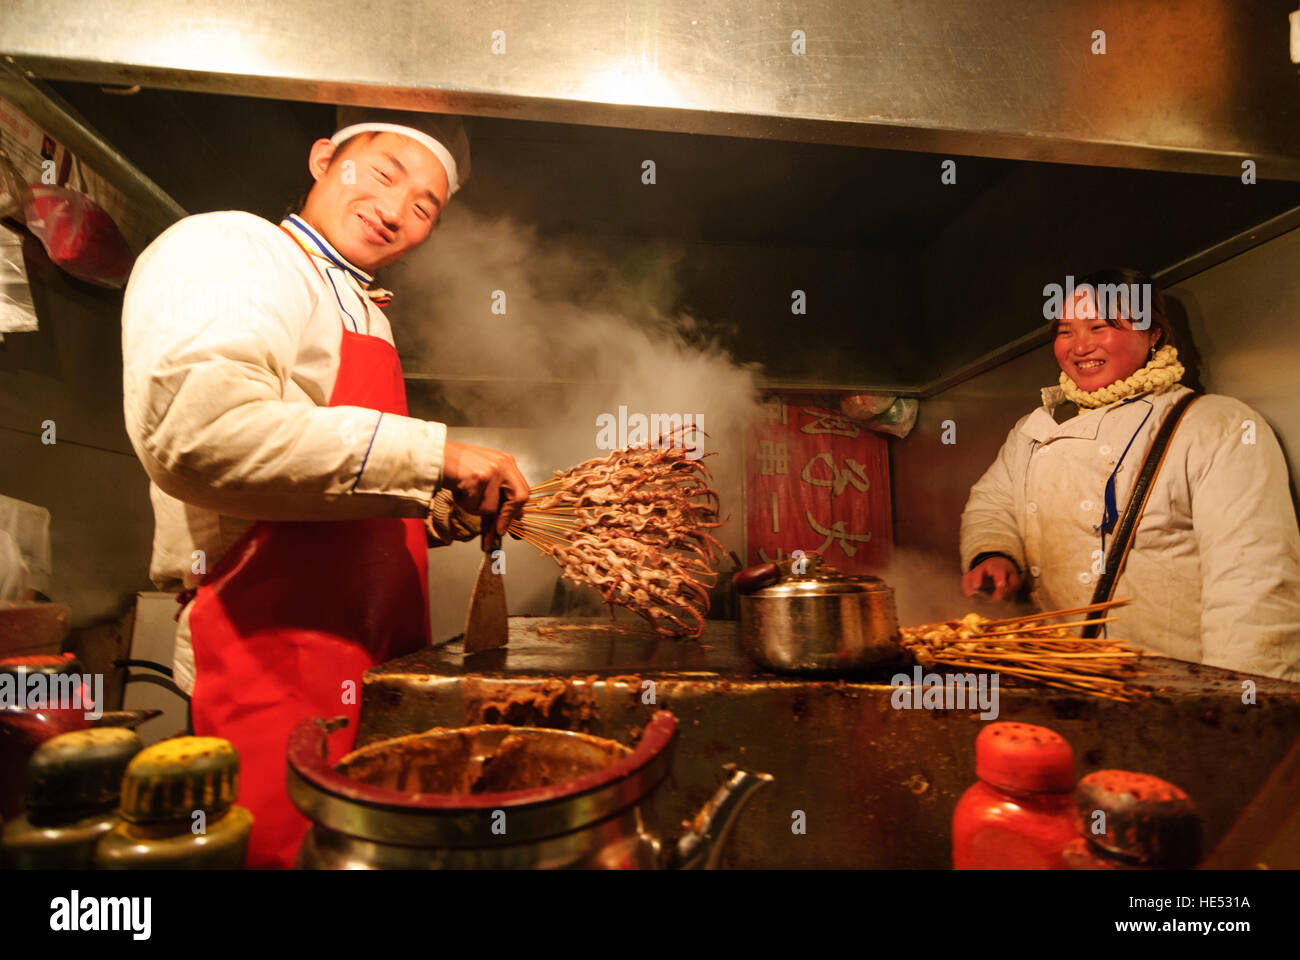 Lanzhou: Food stand in the evening; Squid fish on skewers, Gansu, China Stock Photo